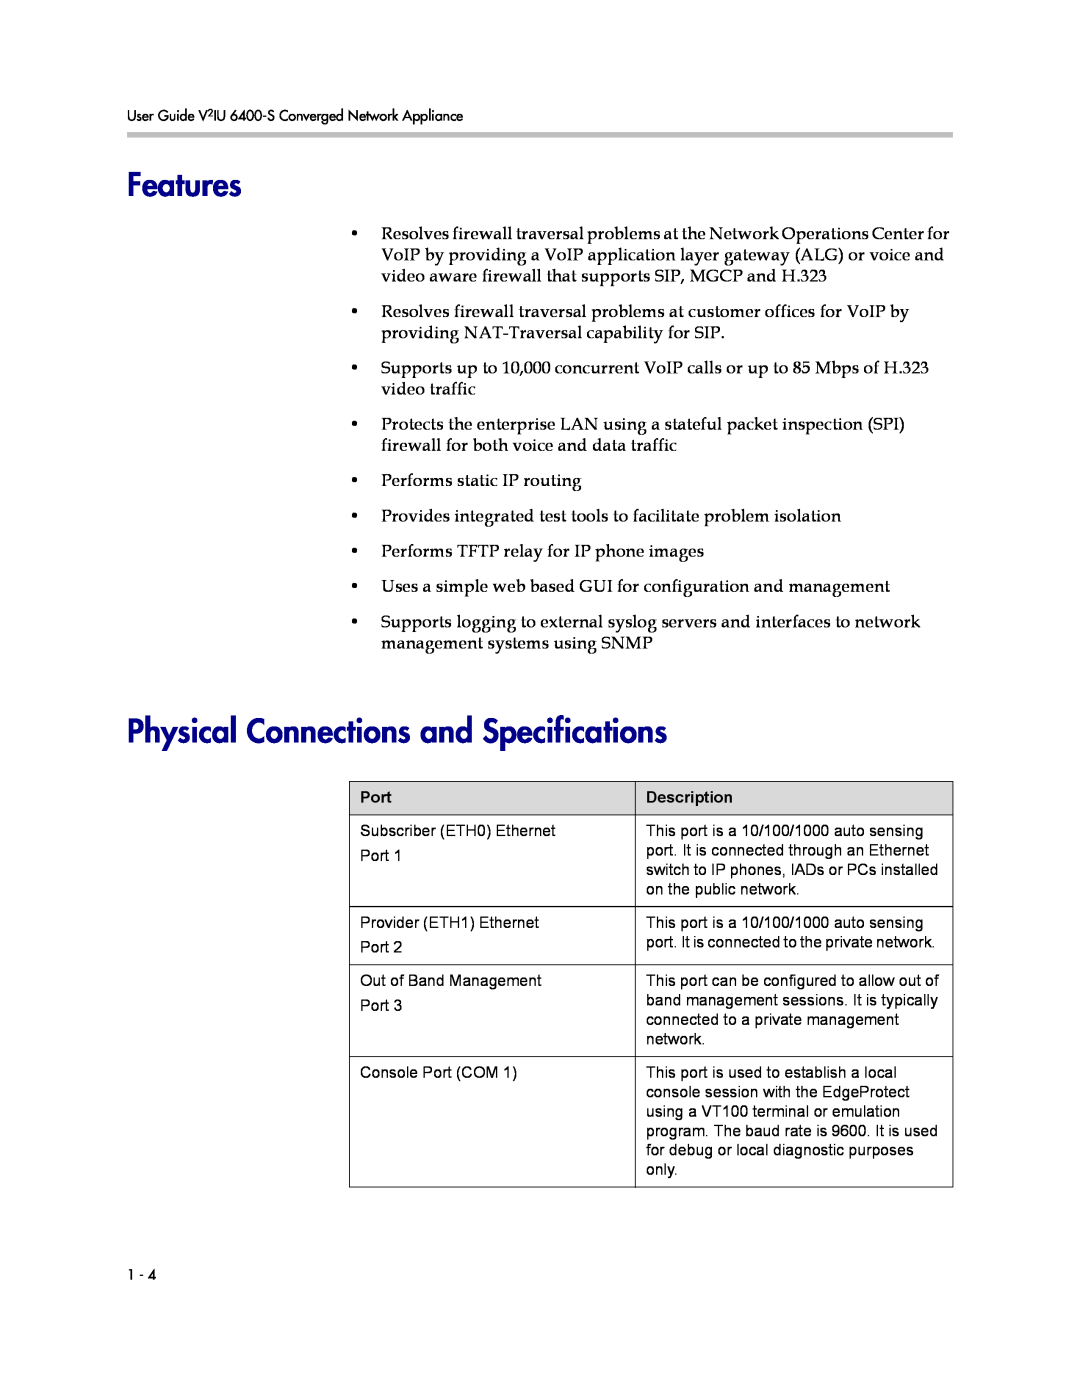 Polycom 6400-S manual Features, Physical Connections and Specifications 